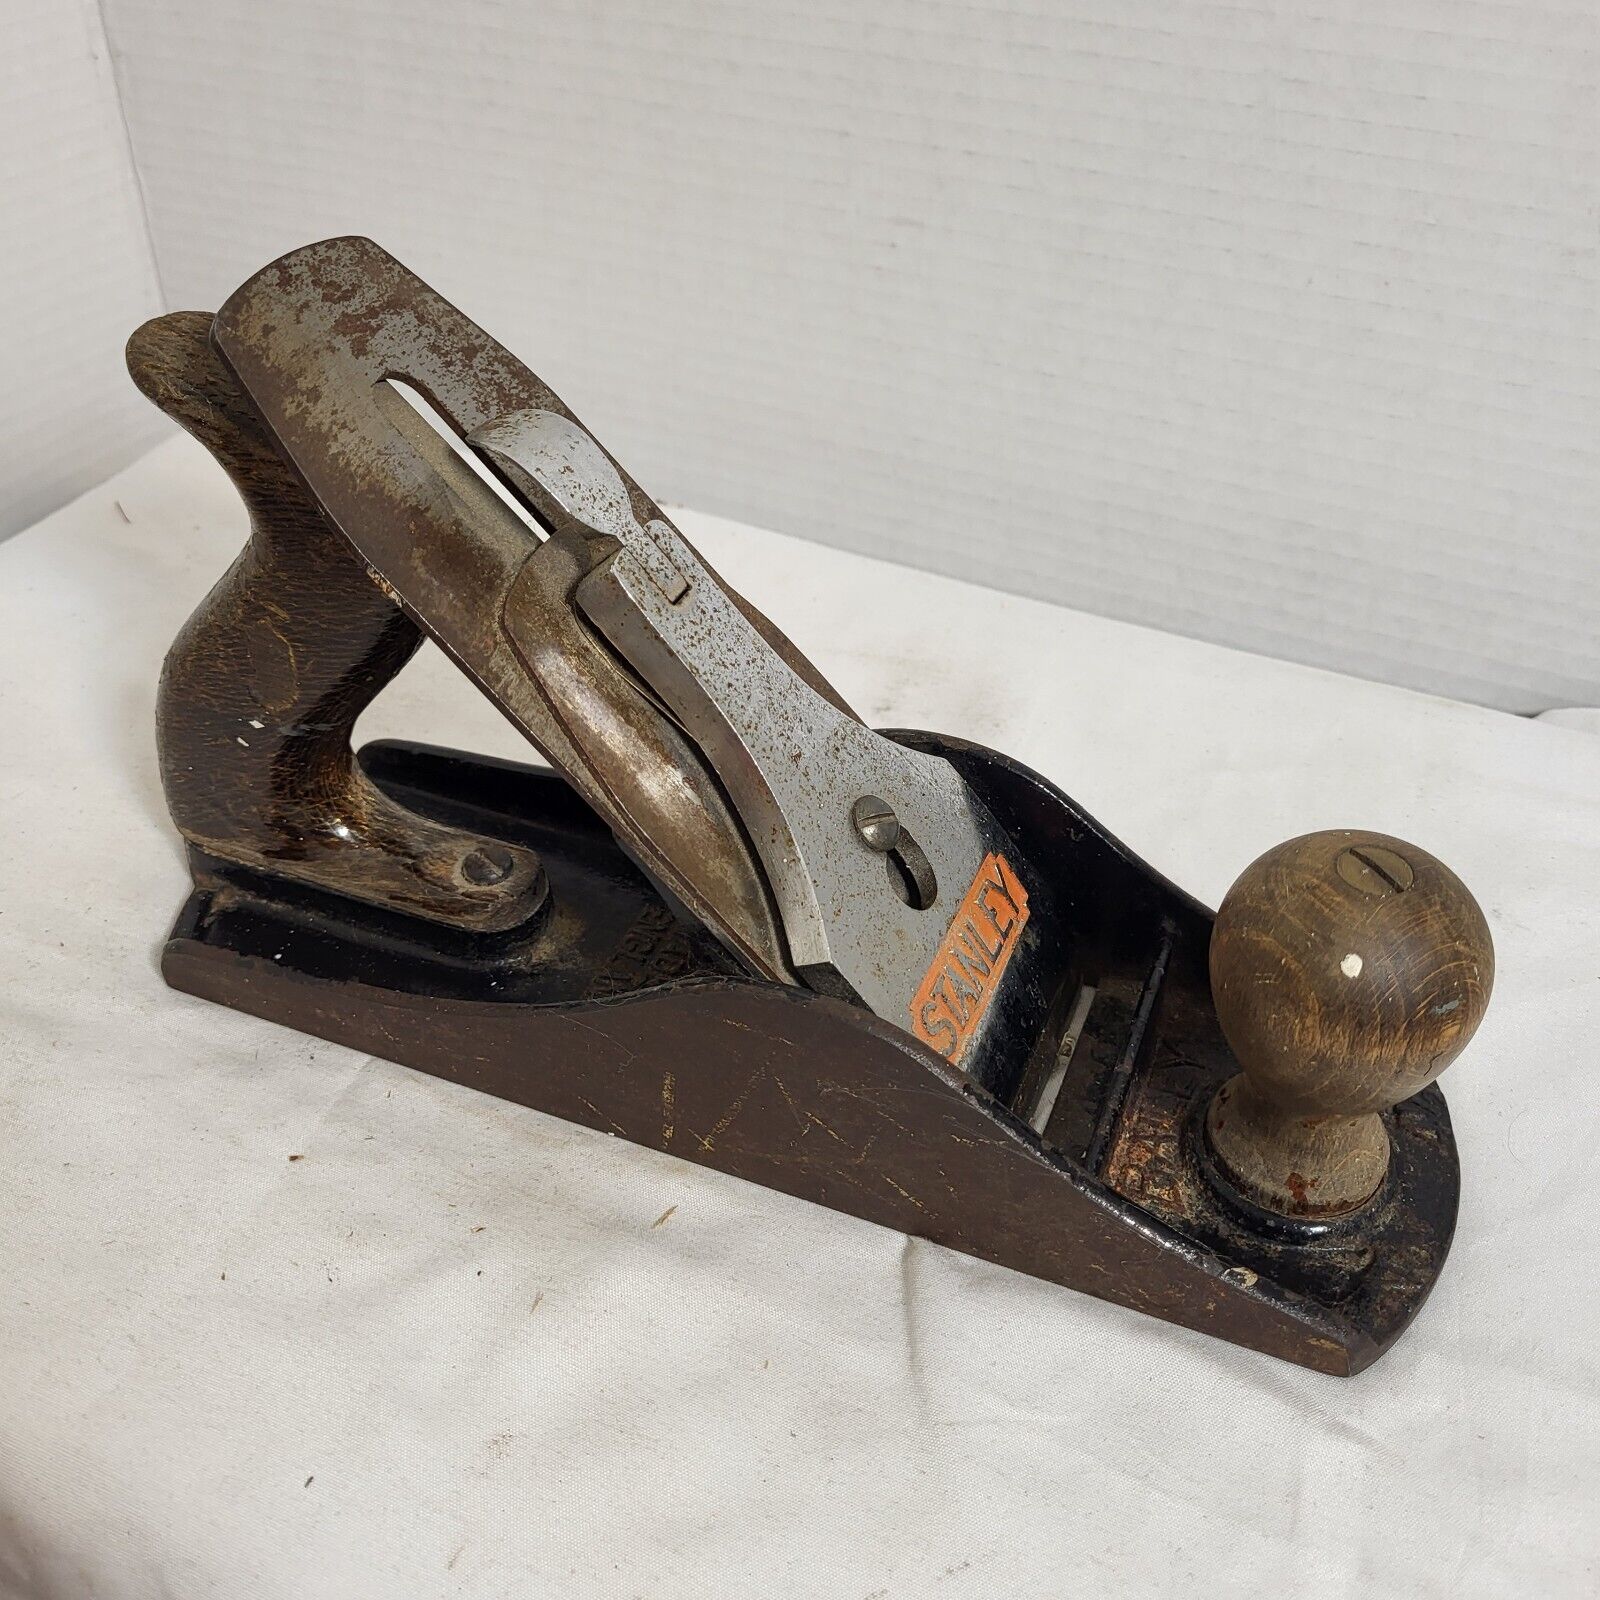 Vintage Stanley Bailey No 4 1/2 Smoothing Plane Made in England